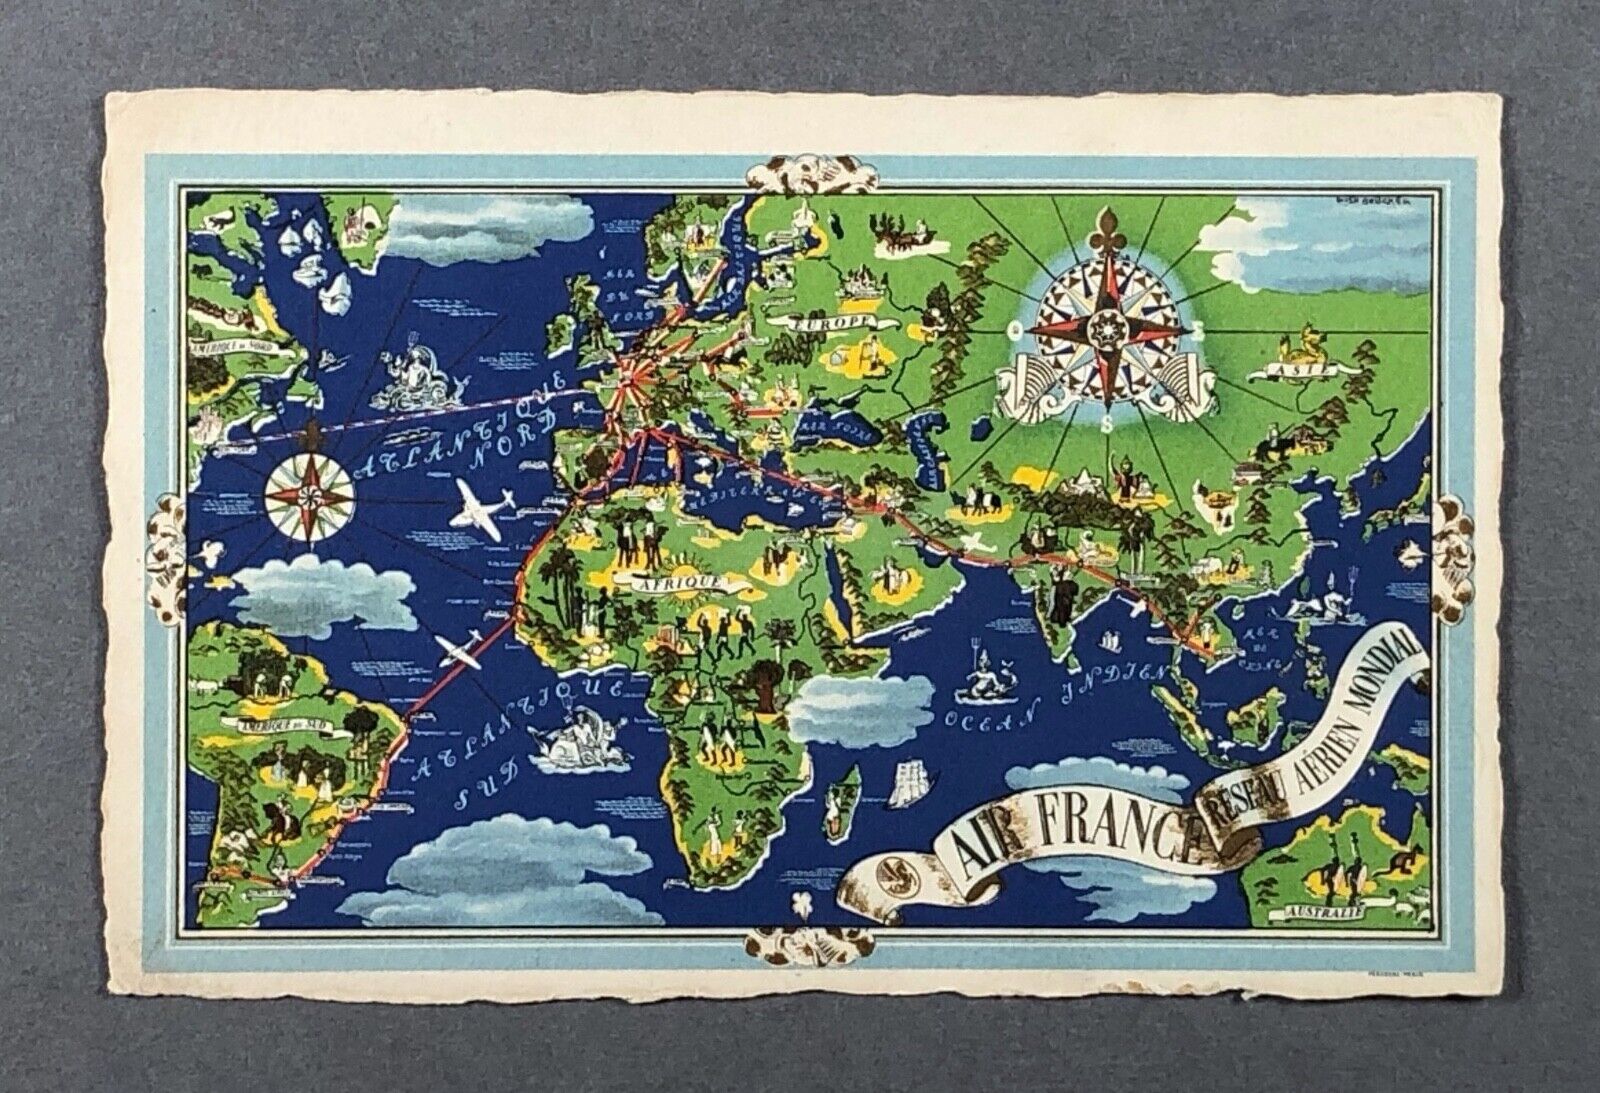 AIR FRANCE AIRLINE ISSUE POST CARD LUCIEN BOUCHER ROUTE MAP 